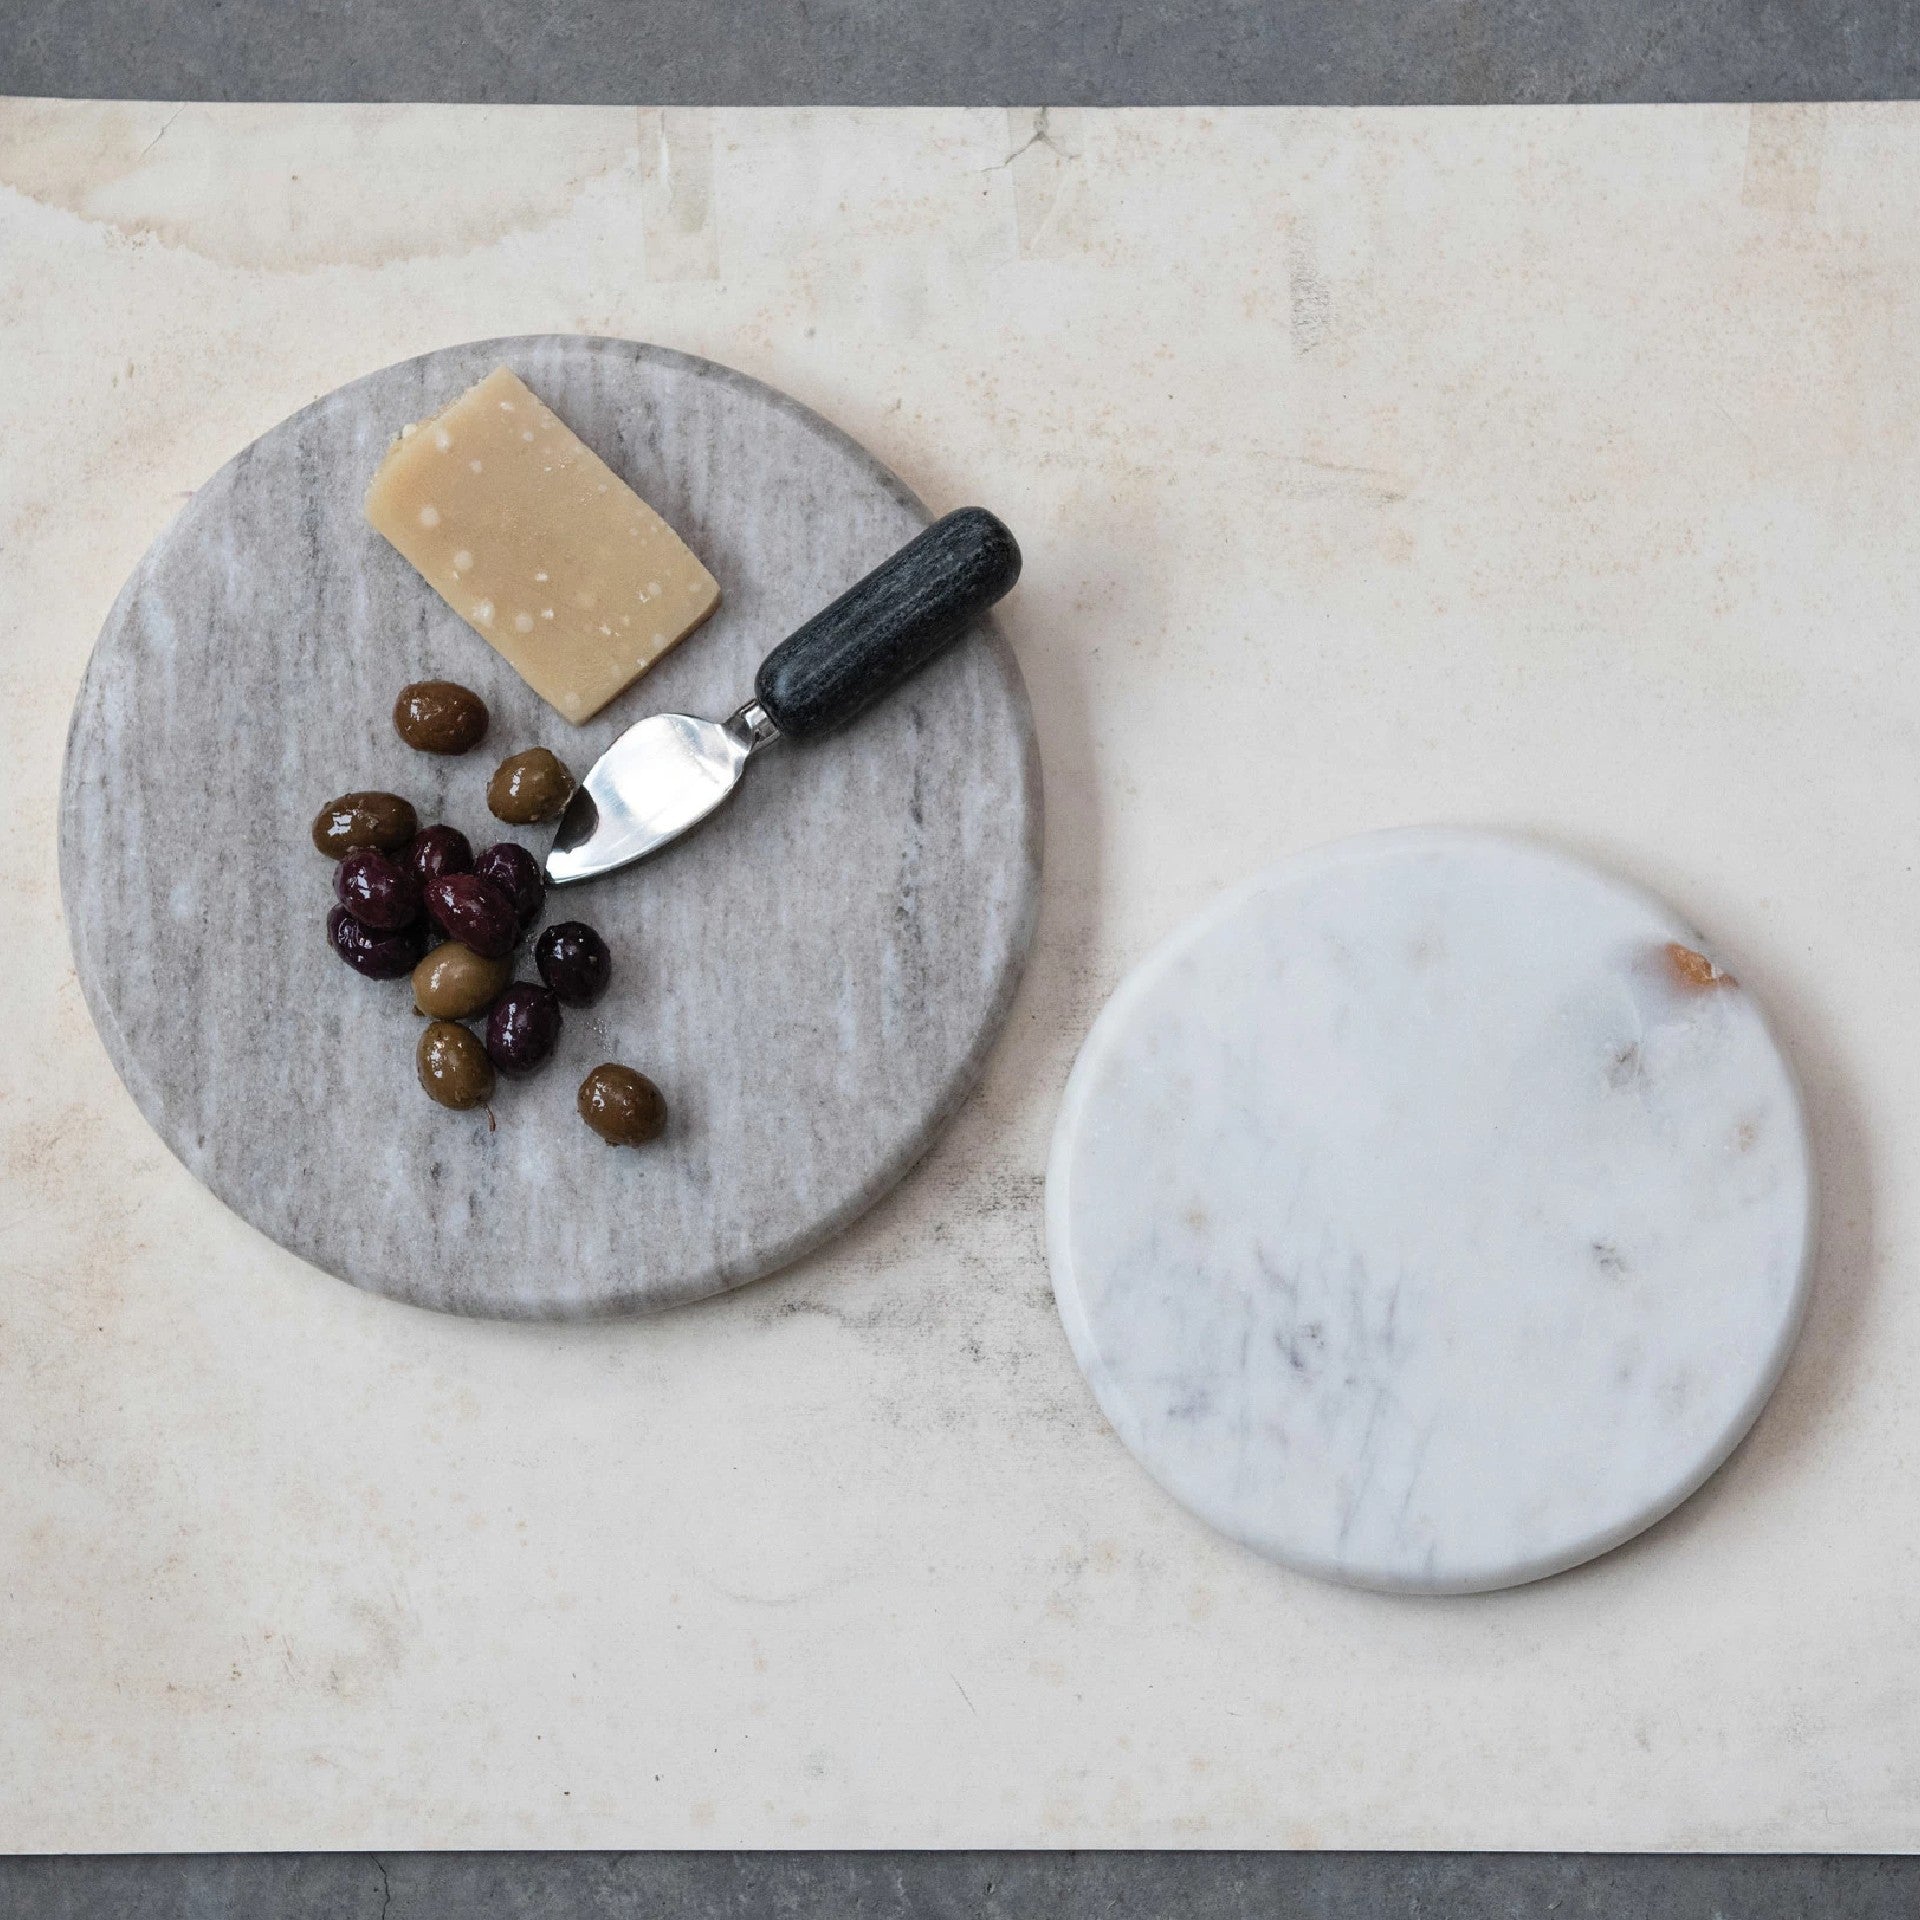 Round Marble Cheese Board